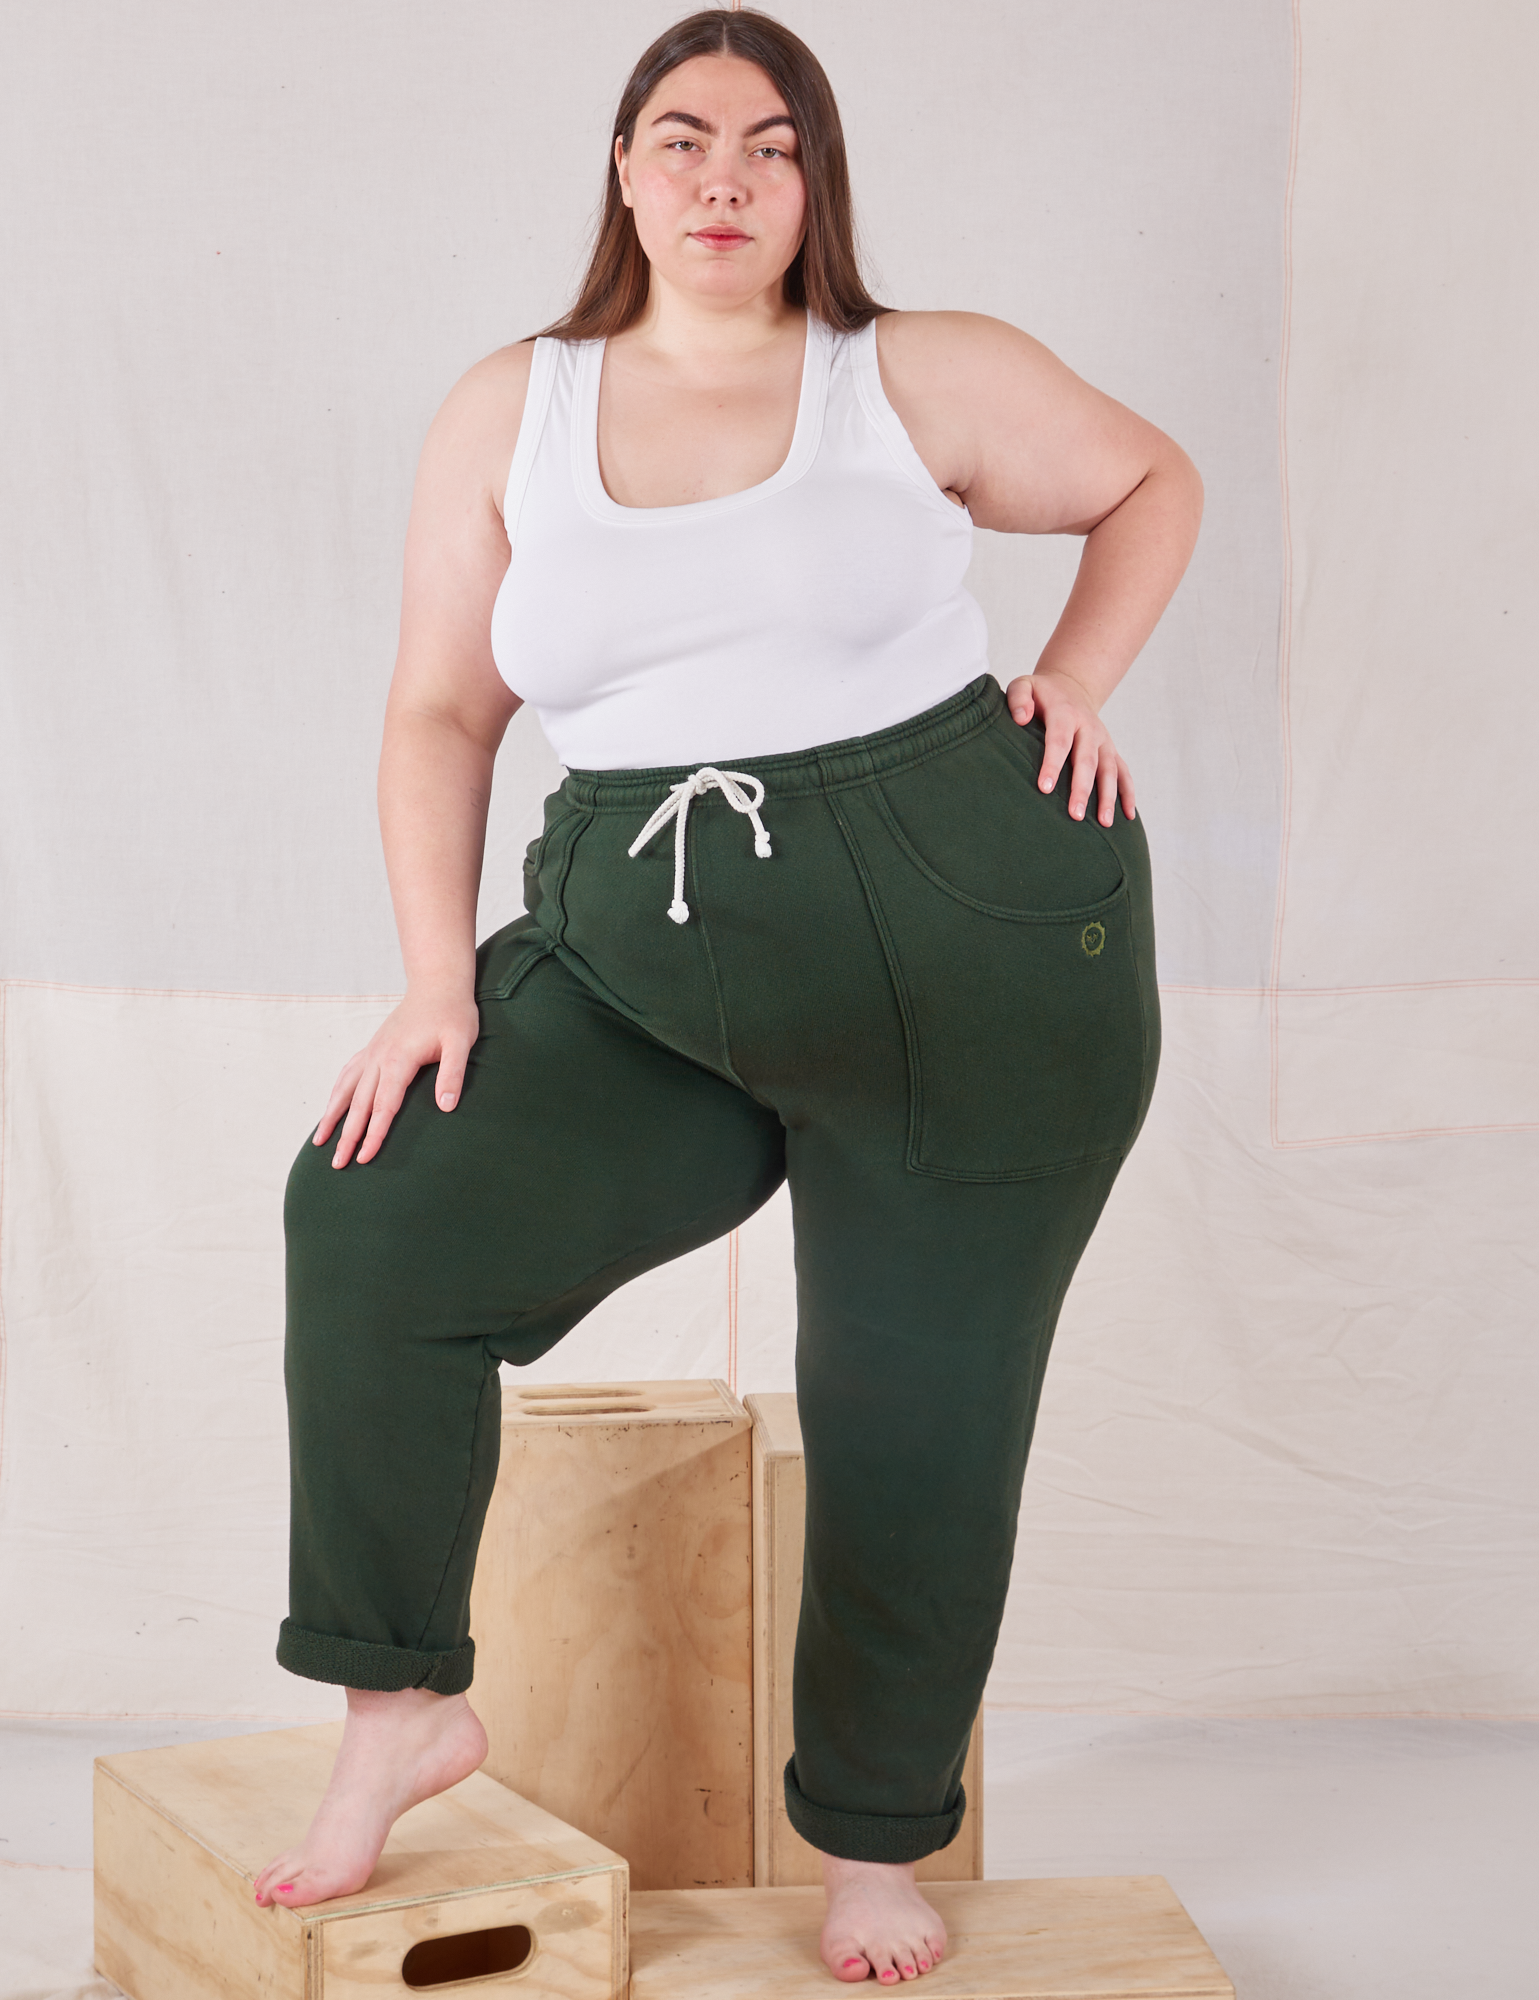 Marielena is 5&#39;8&quot; and wearing 1XL Rolled Cuff Sweat Pants in Swamp Green paired with vintage off-white Cropped Tank Top